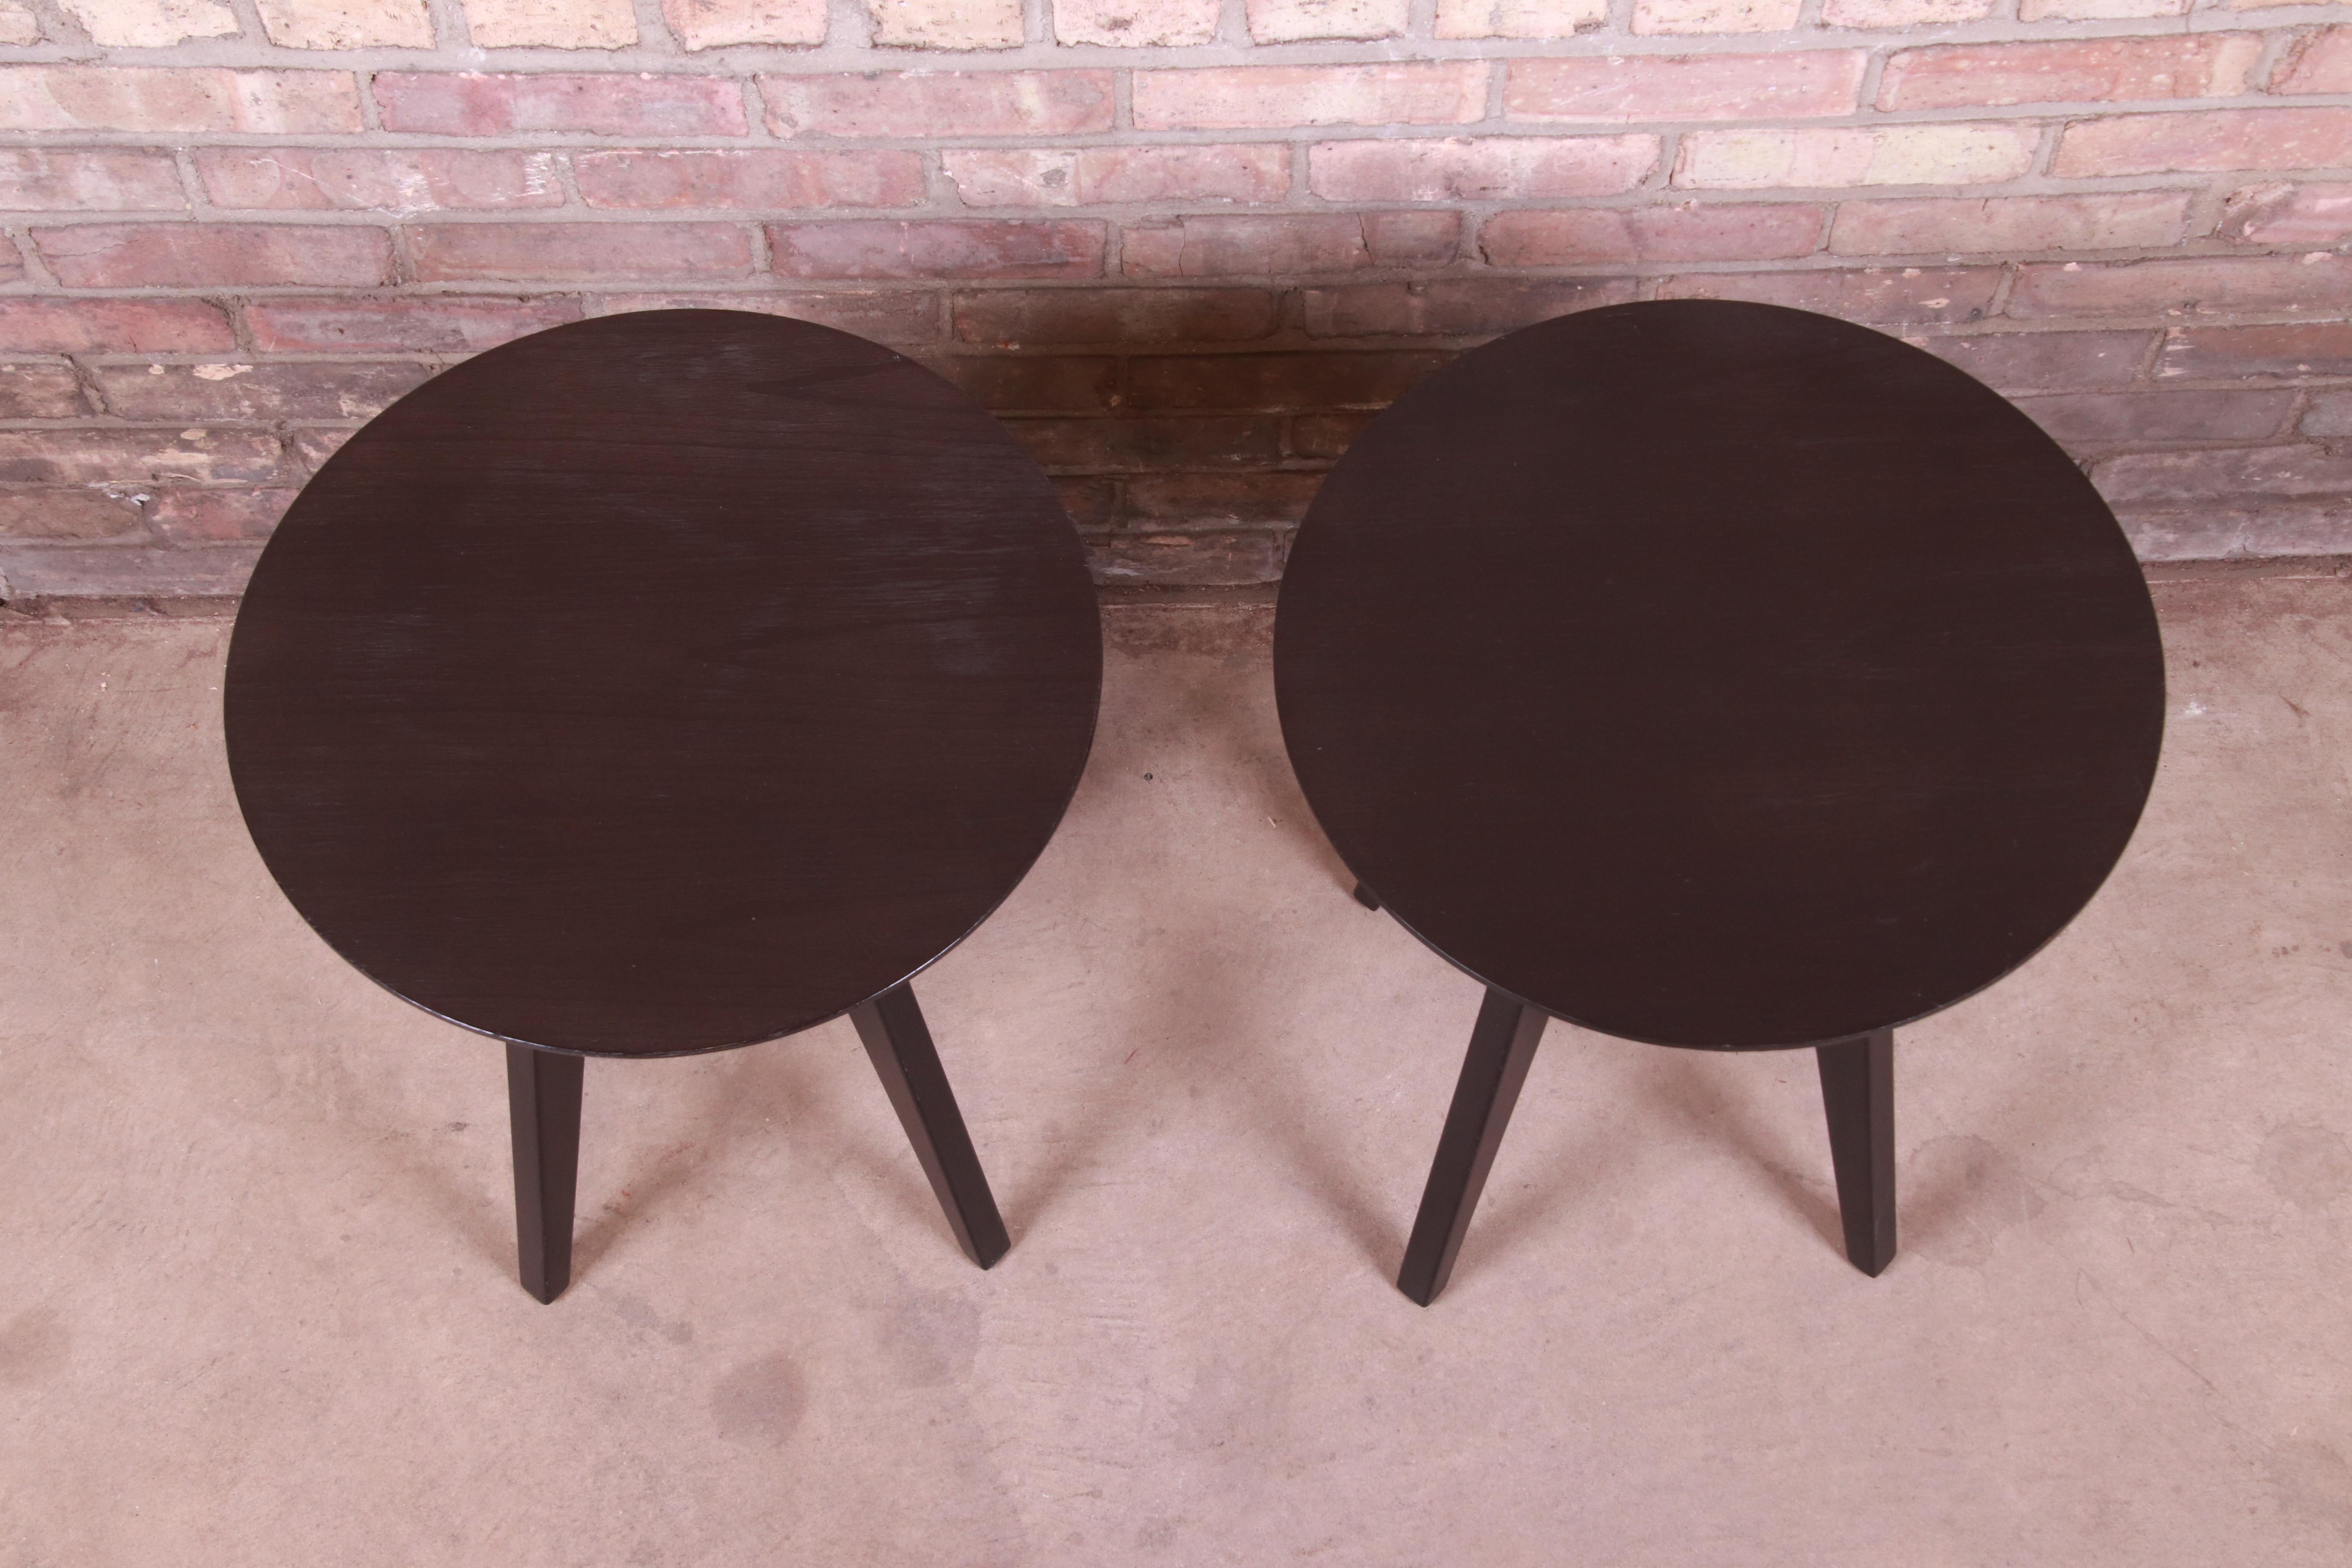 Jens Risom for Knoll Mid-Century Modern Black Lacquered Side Tables, Pair 1